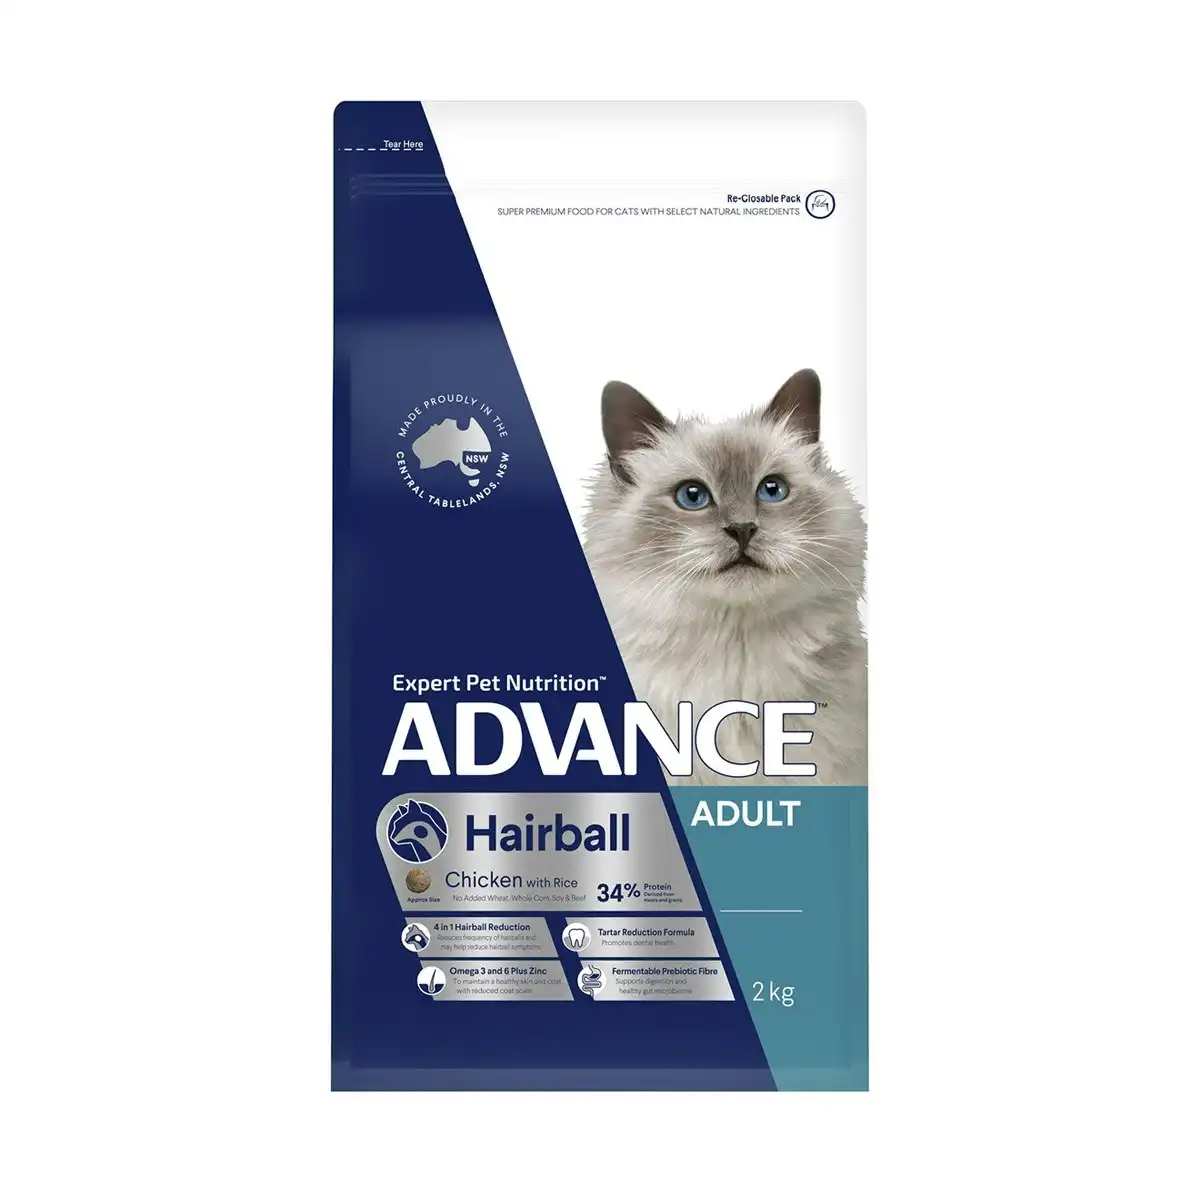 ADVANCE Hairball Adult Chicken with Rice Dry Cat Food 2 Kg